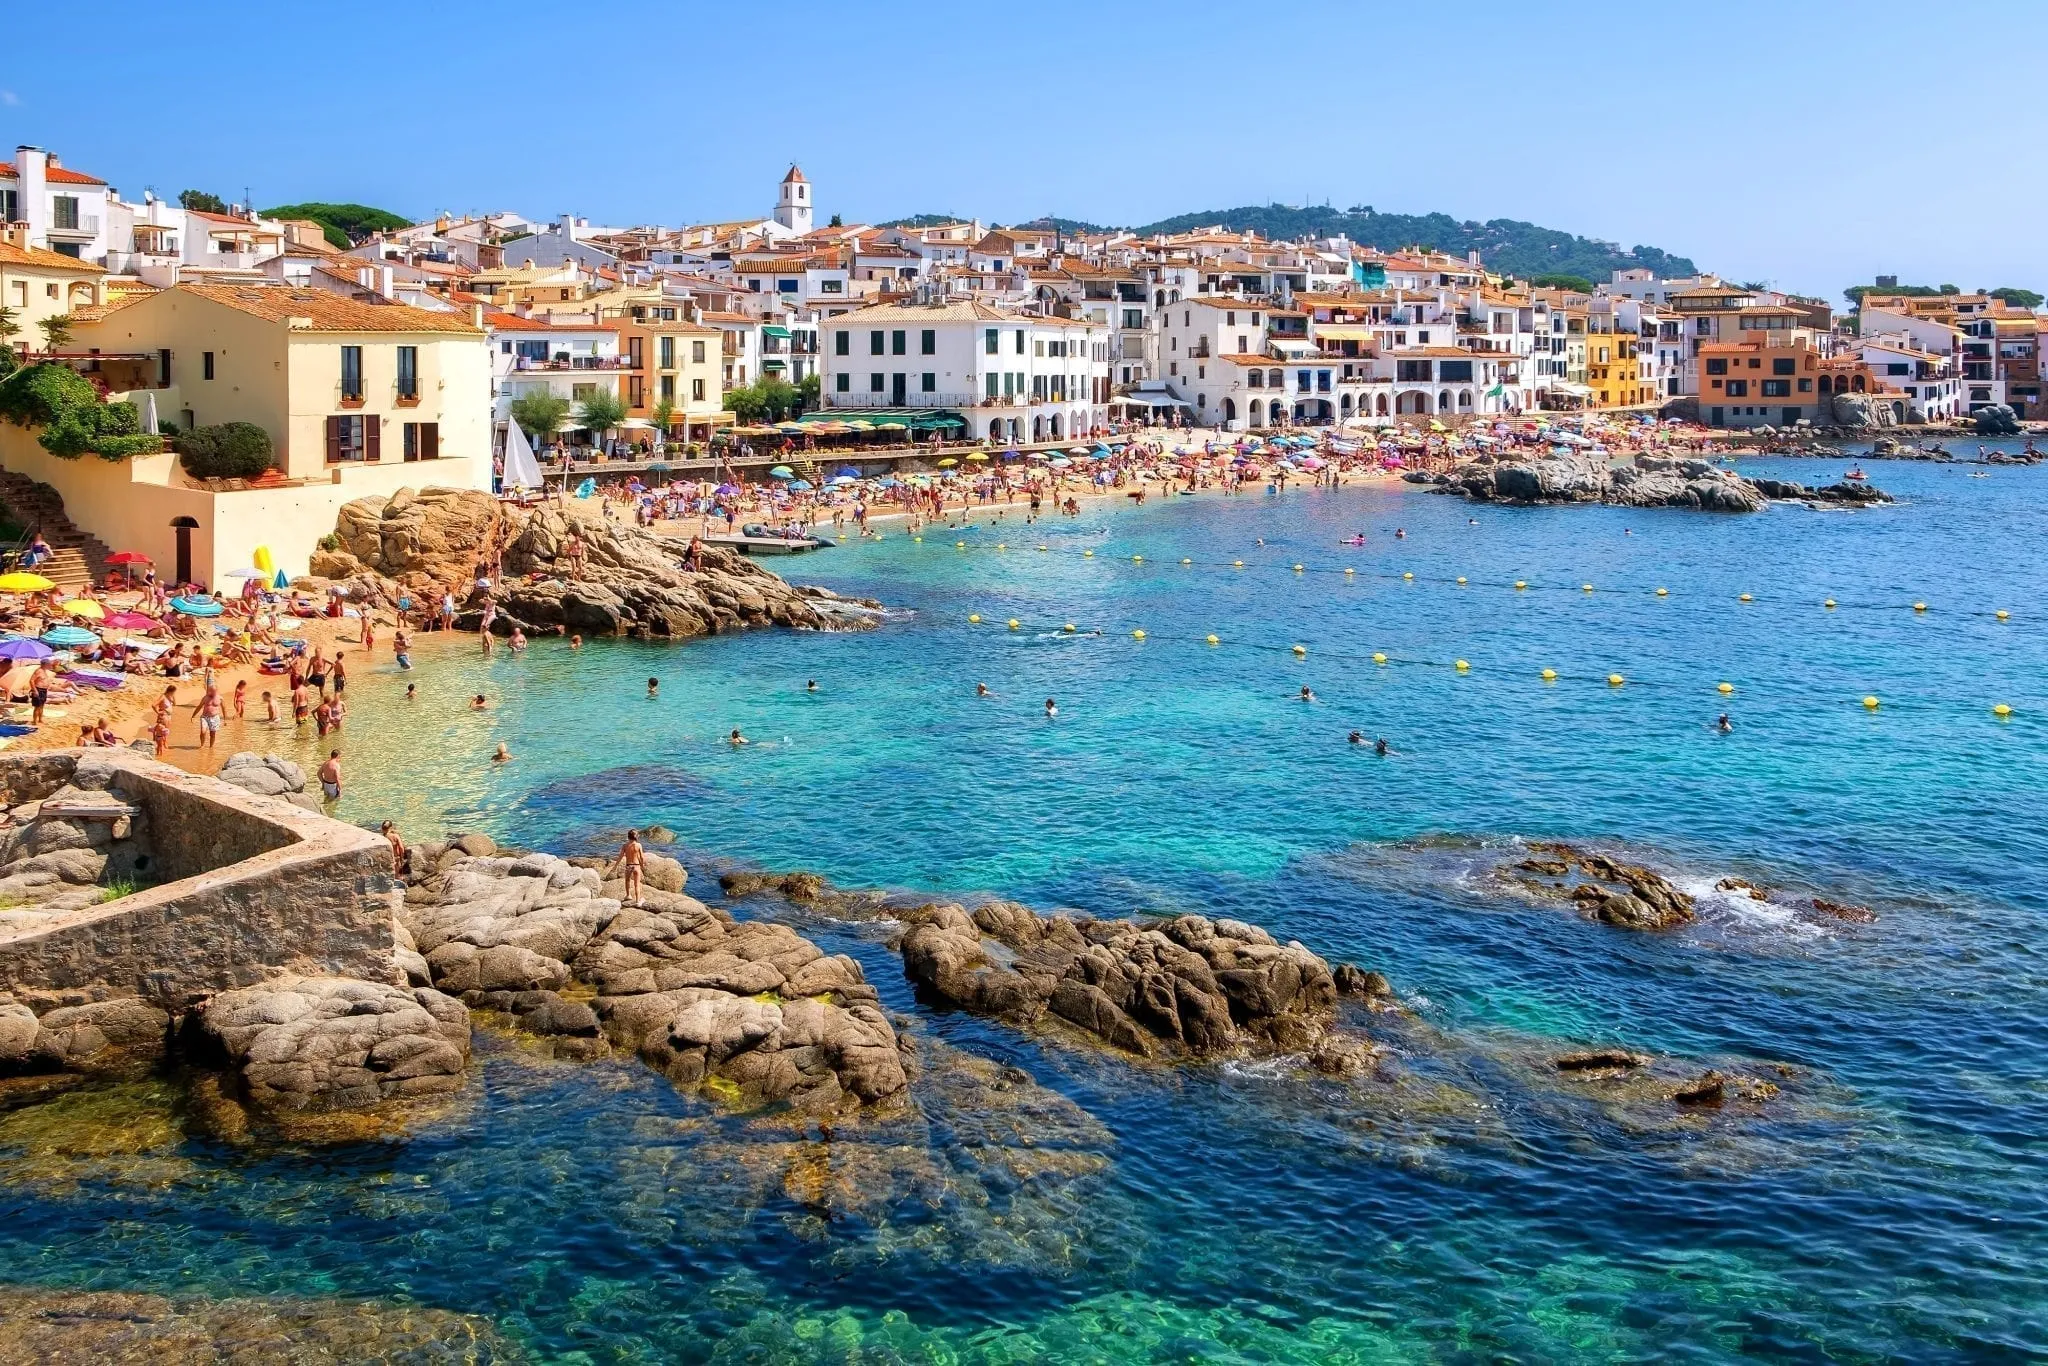 coastline of Costa Brava Spain as seen from across with water, with a village visible in the distance. Spain's Costa Brava is one of the best European road trip routes!